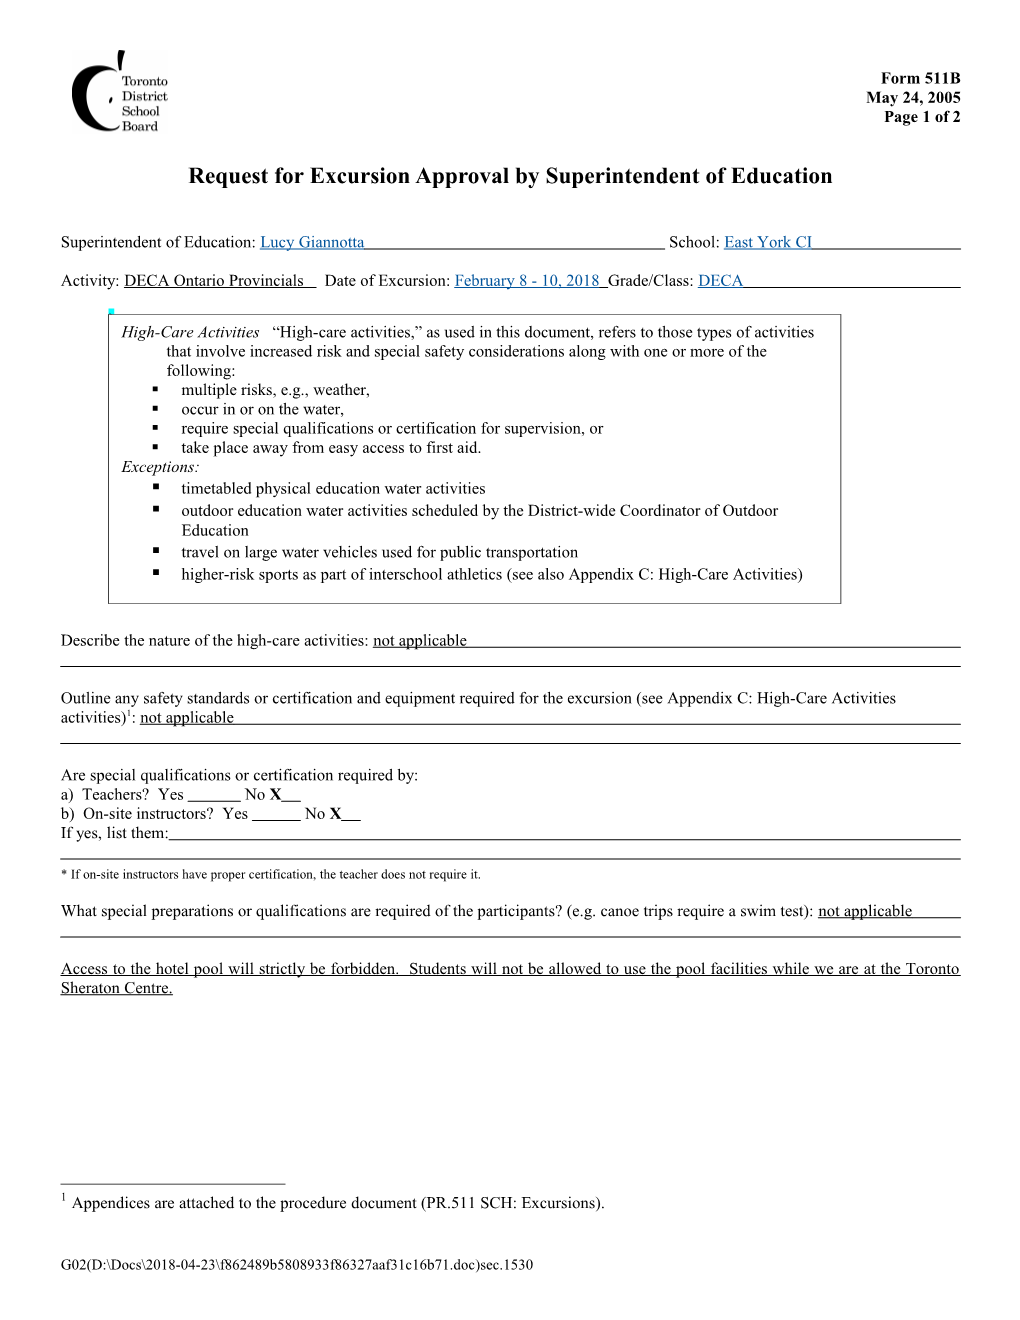 Form 511B: Request for Excursion Approval by Superintendent of Education